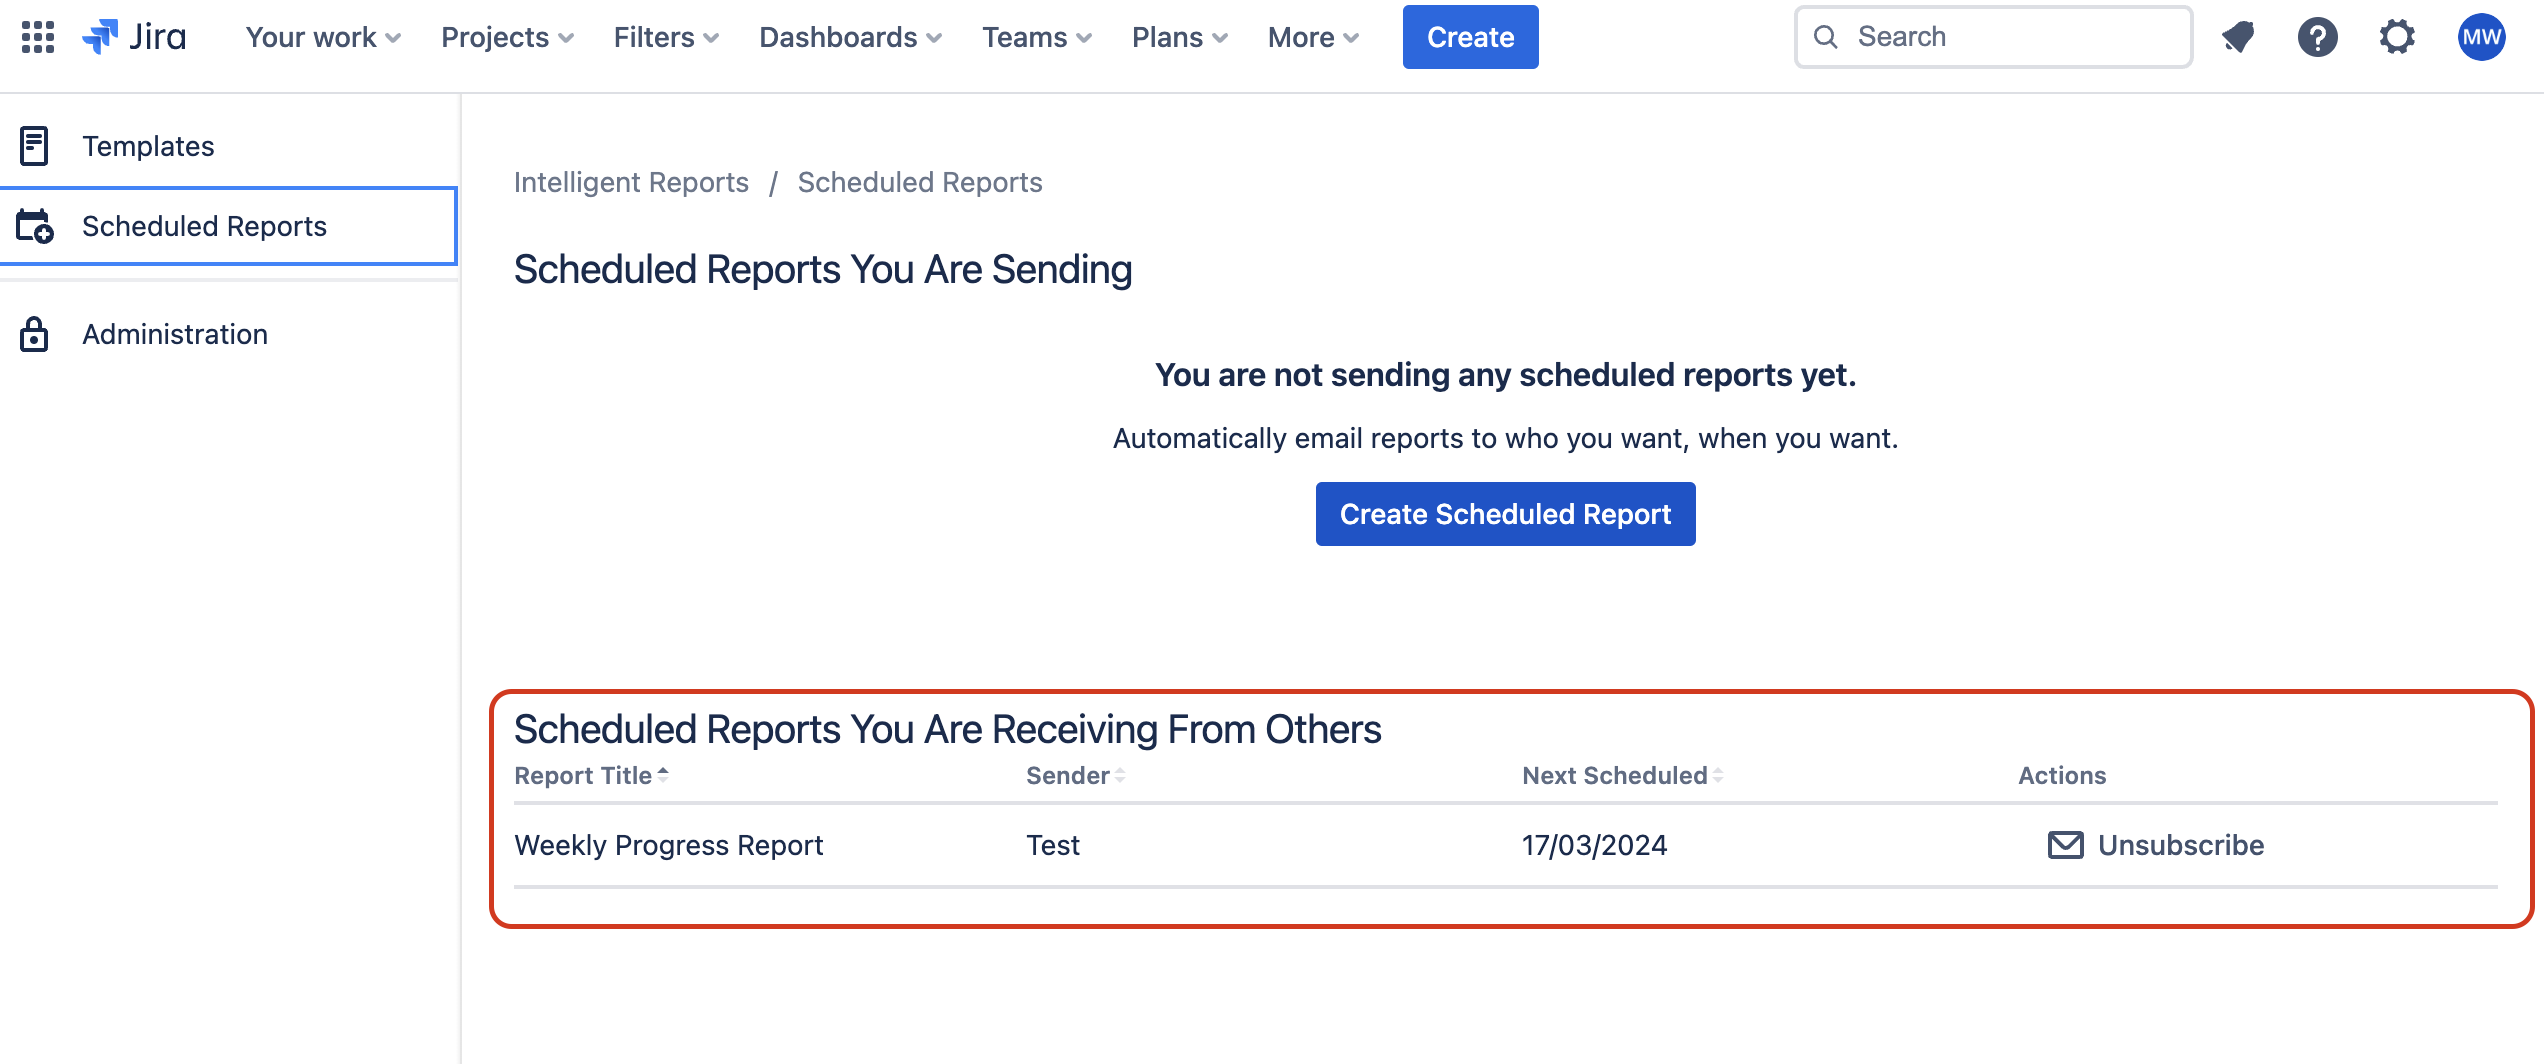 A list of scheduled reports that you are receiving from other users